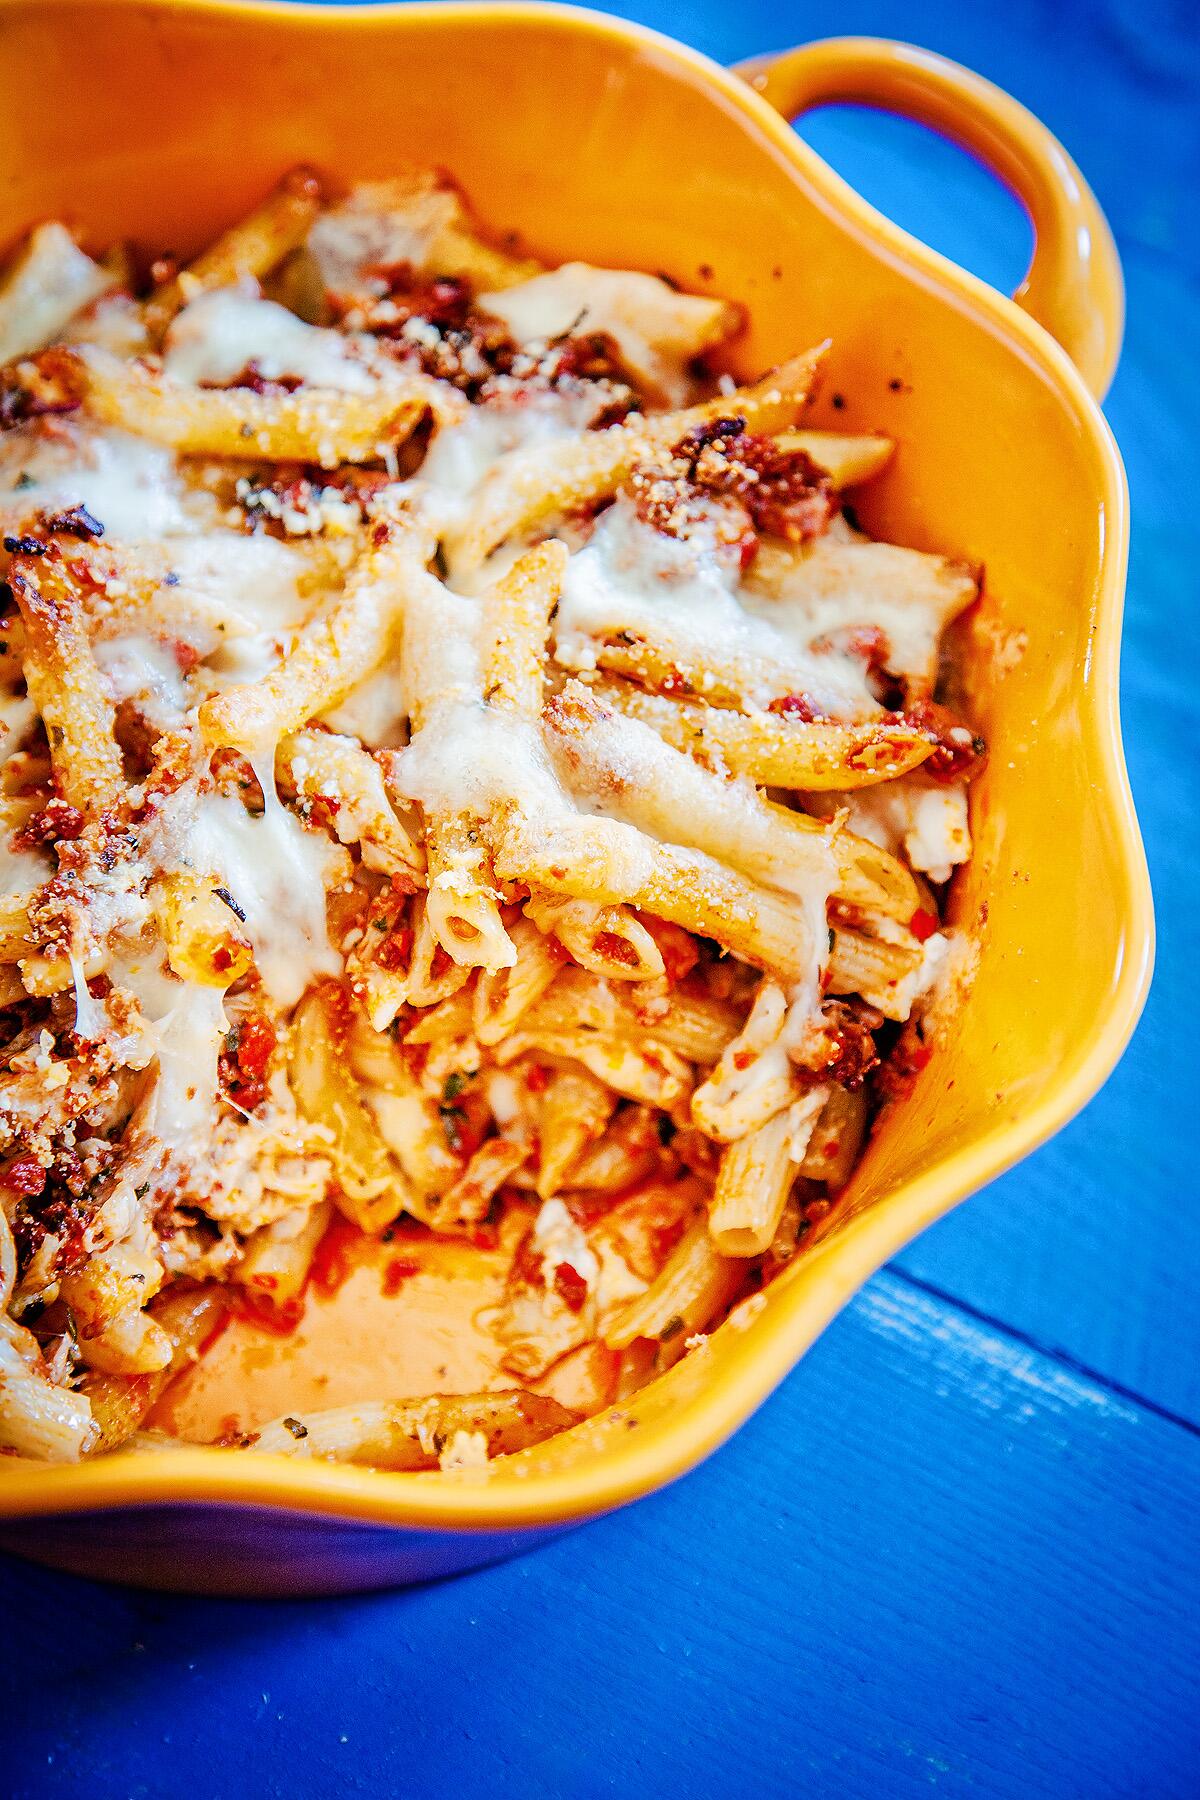 A baked pasta dish is studded with chicken, cheese and pine nuts.